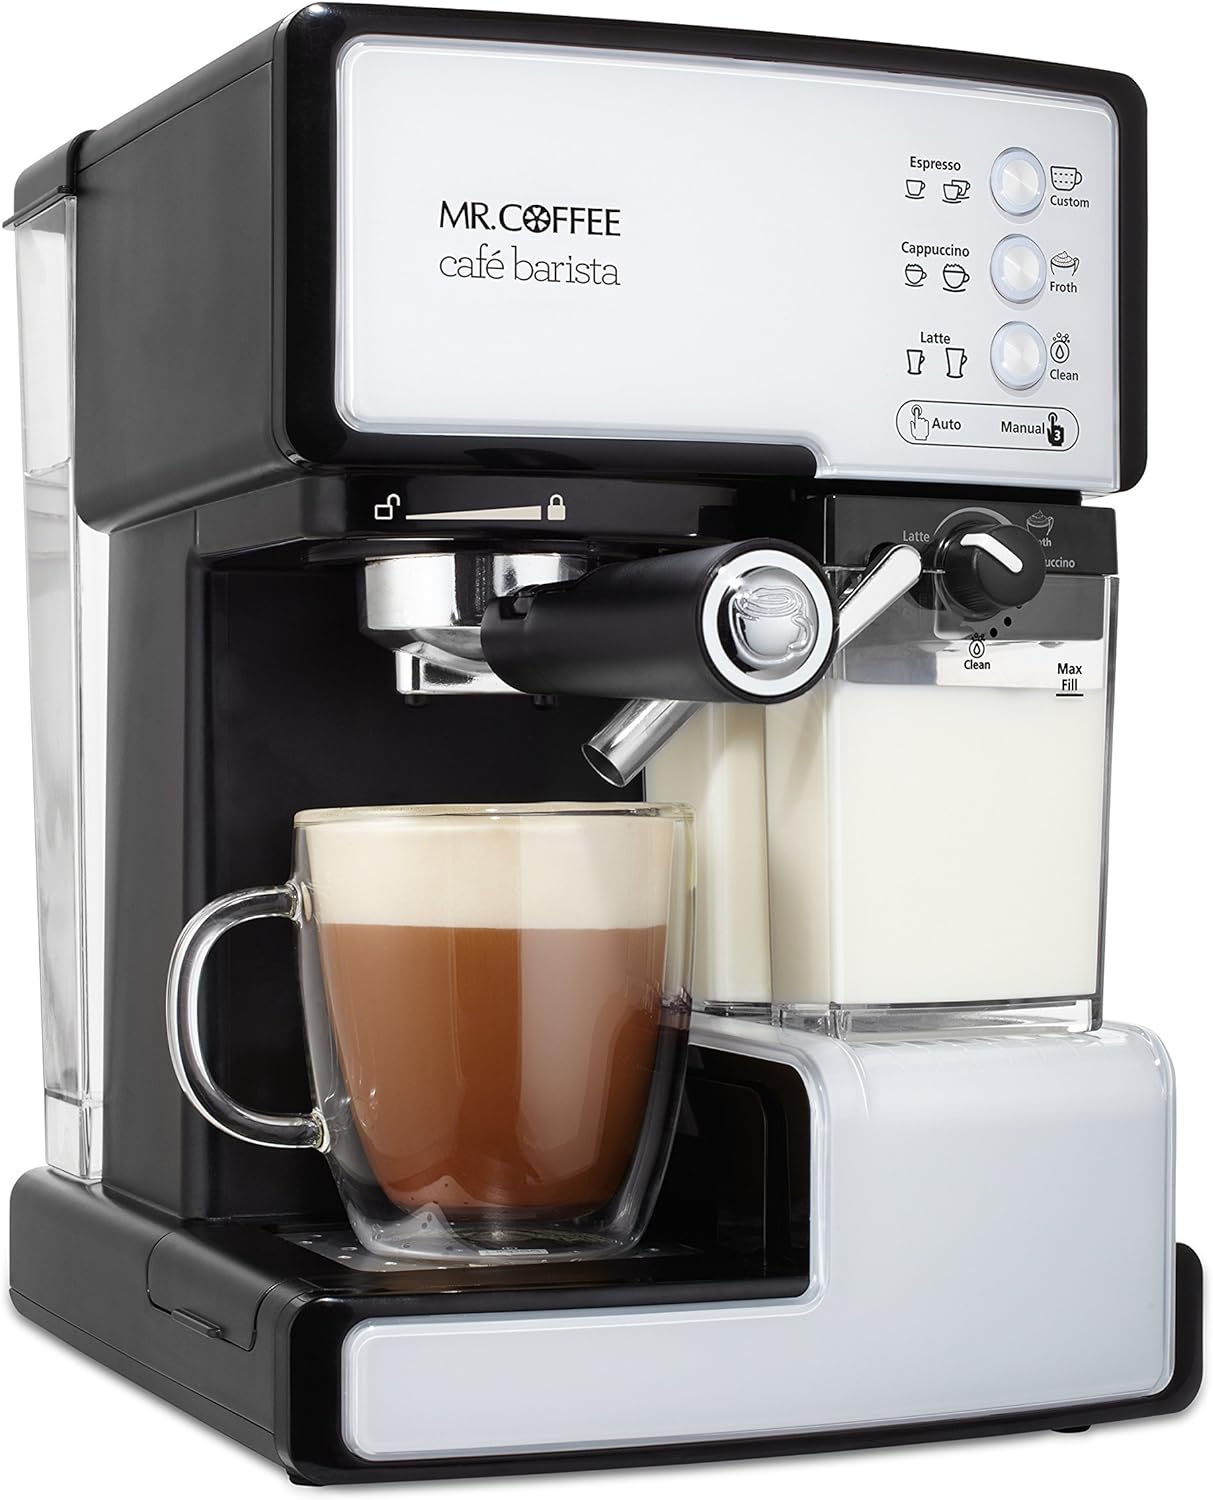 Mr. Coffee Espresso and Cappuccino Machine, Programmable Coffee Maker with Automatic Milk Frother and 15-Bar Pump, Stainless Steel